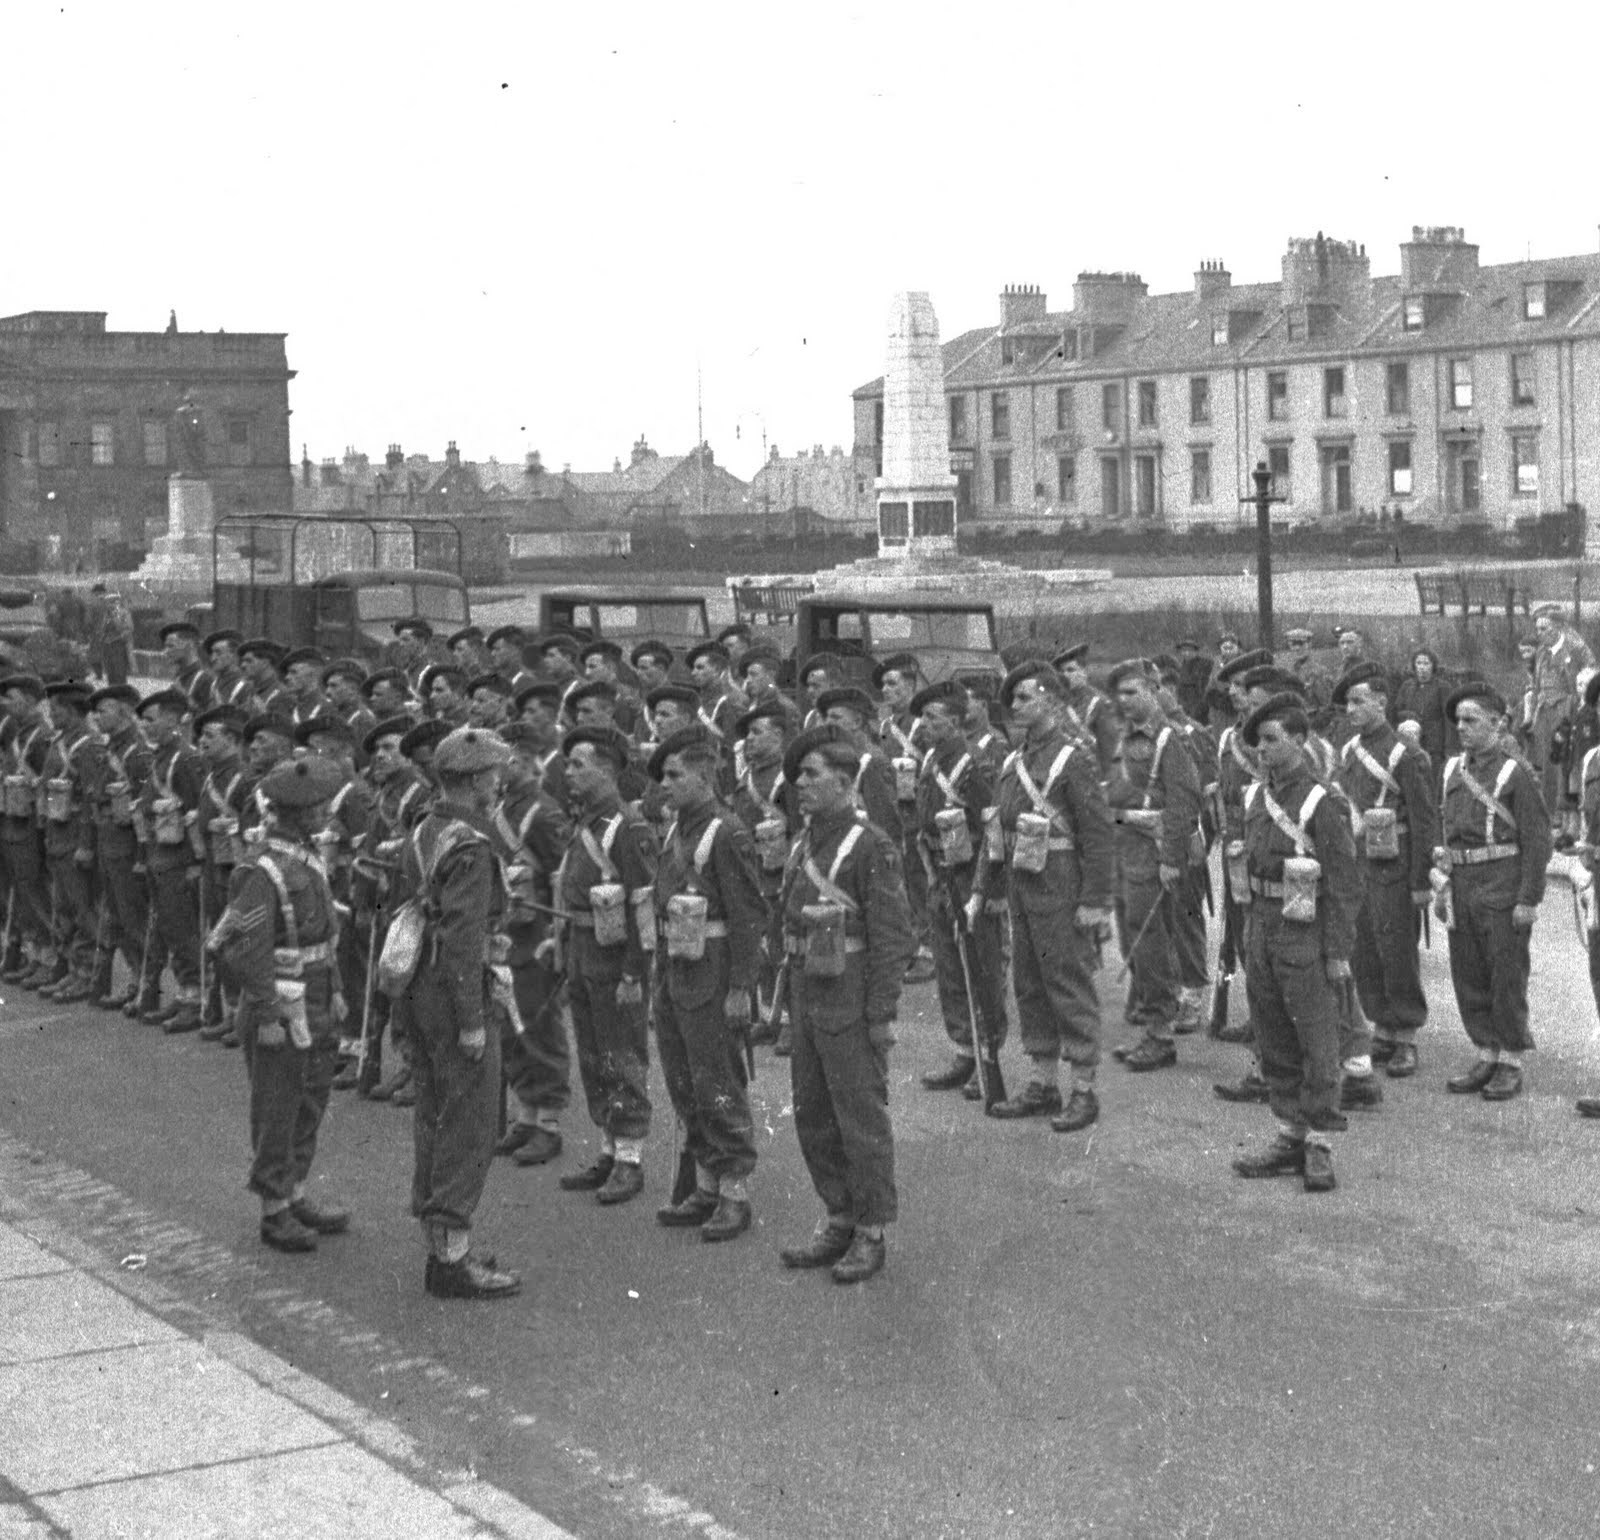 Troop Inspection No.2 Commando  at Wellington Square, Ayr 1941/2